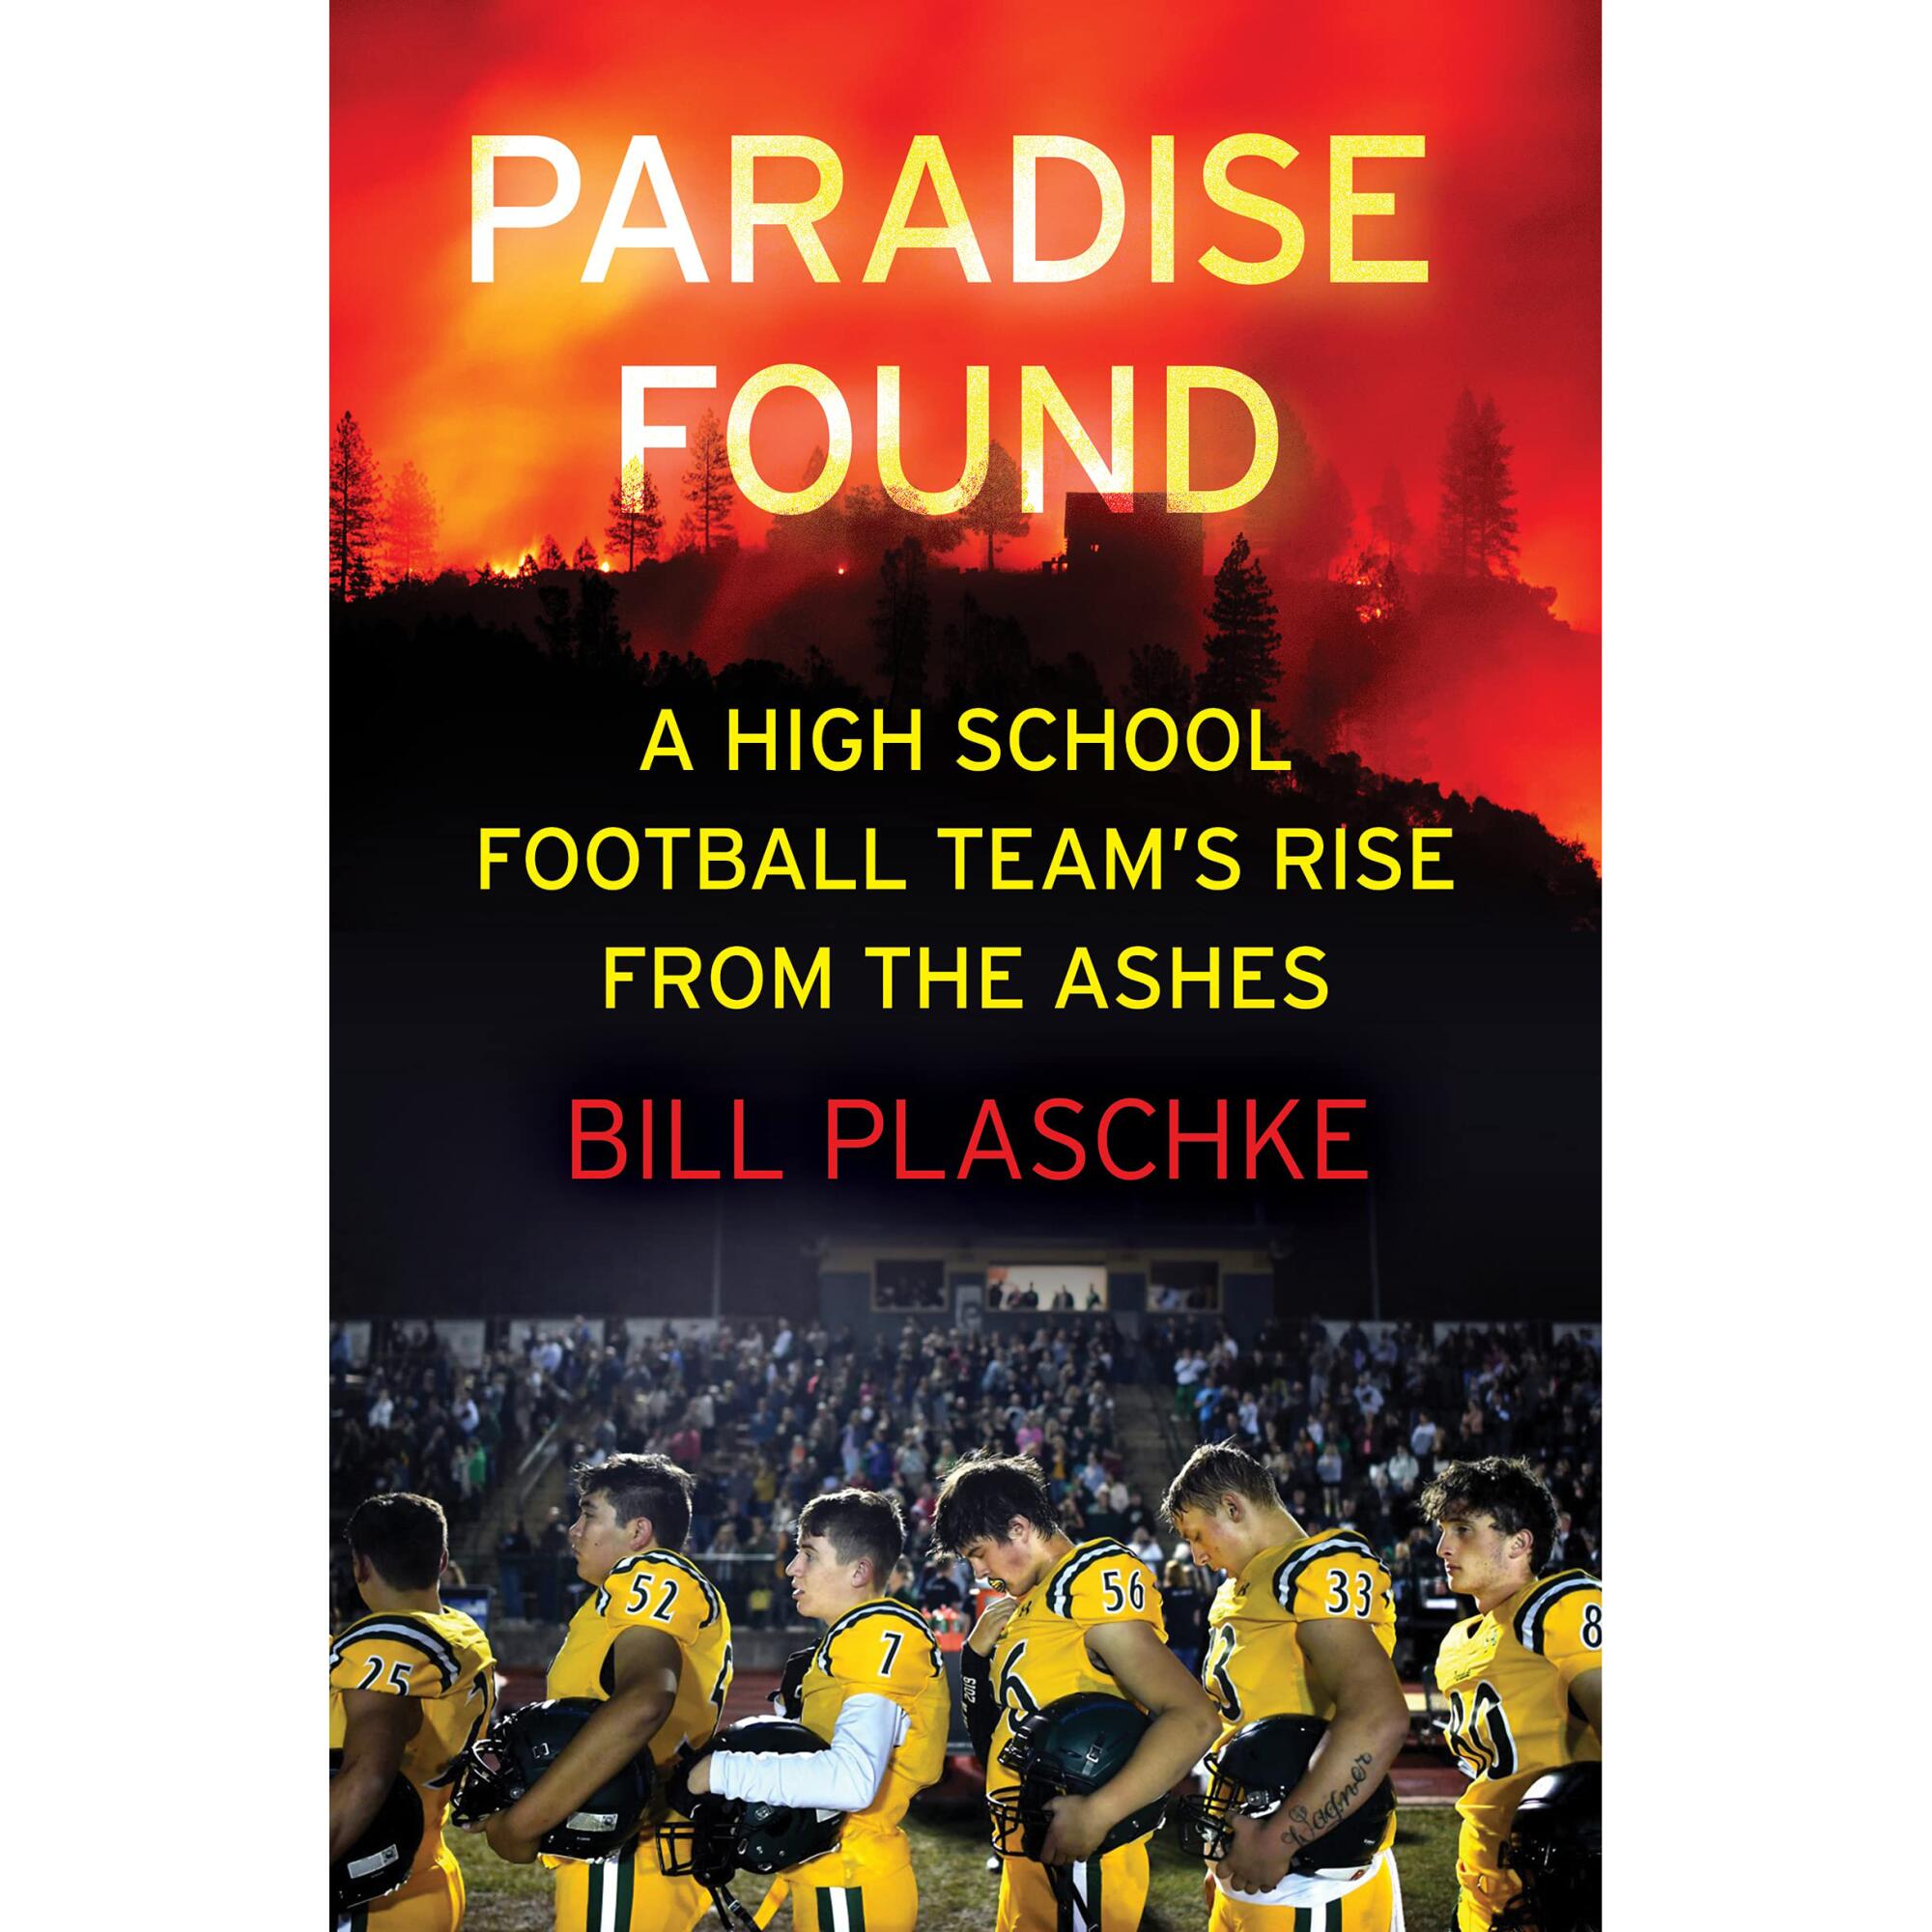 "Paradise Found: A High School Football Team's Rise From the Ashes" by Bill Plaschke.